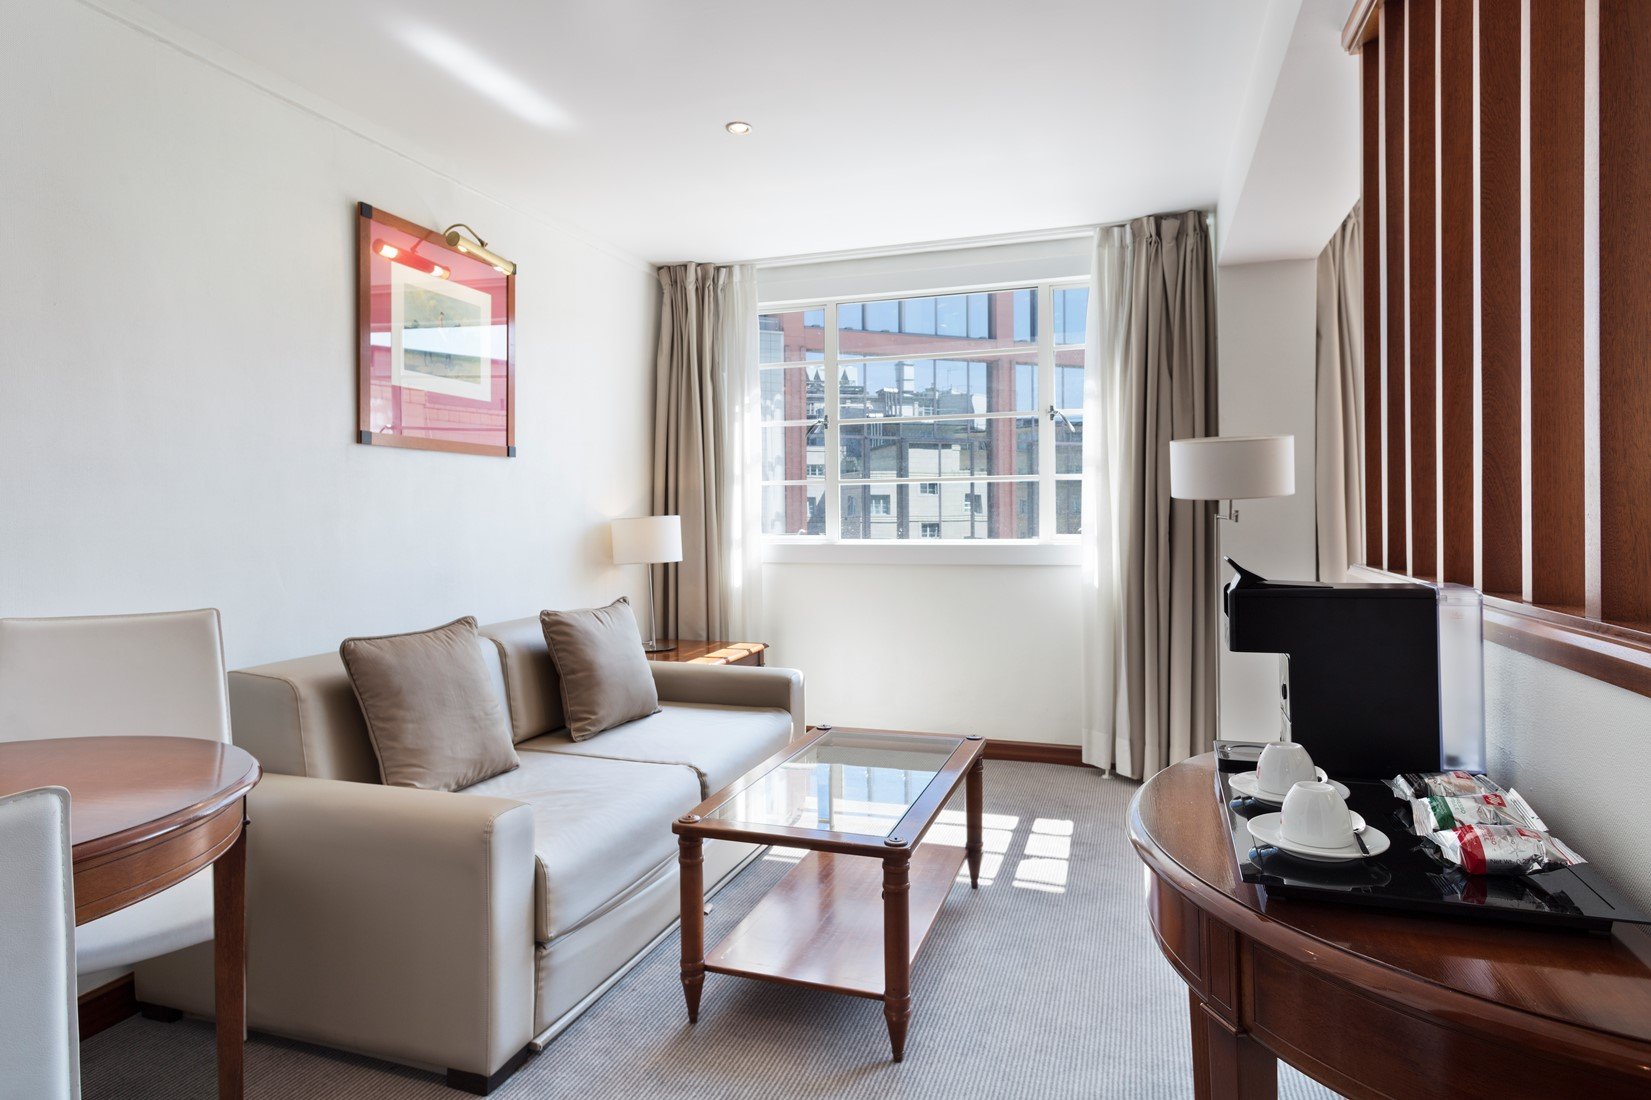 Low-Cost-Luxury-Regents-Park-Serviced-Apartments-London!-Book-With-Urban-Stay-today-from-only-£92/night!-Free-Wifi-+-Gym-+-Reception!